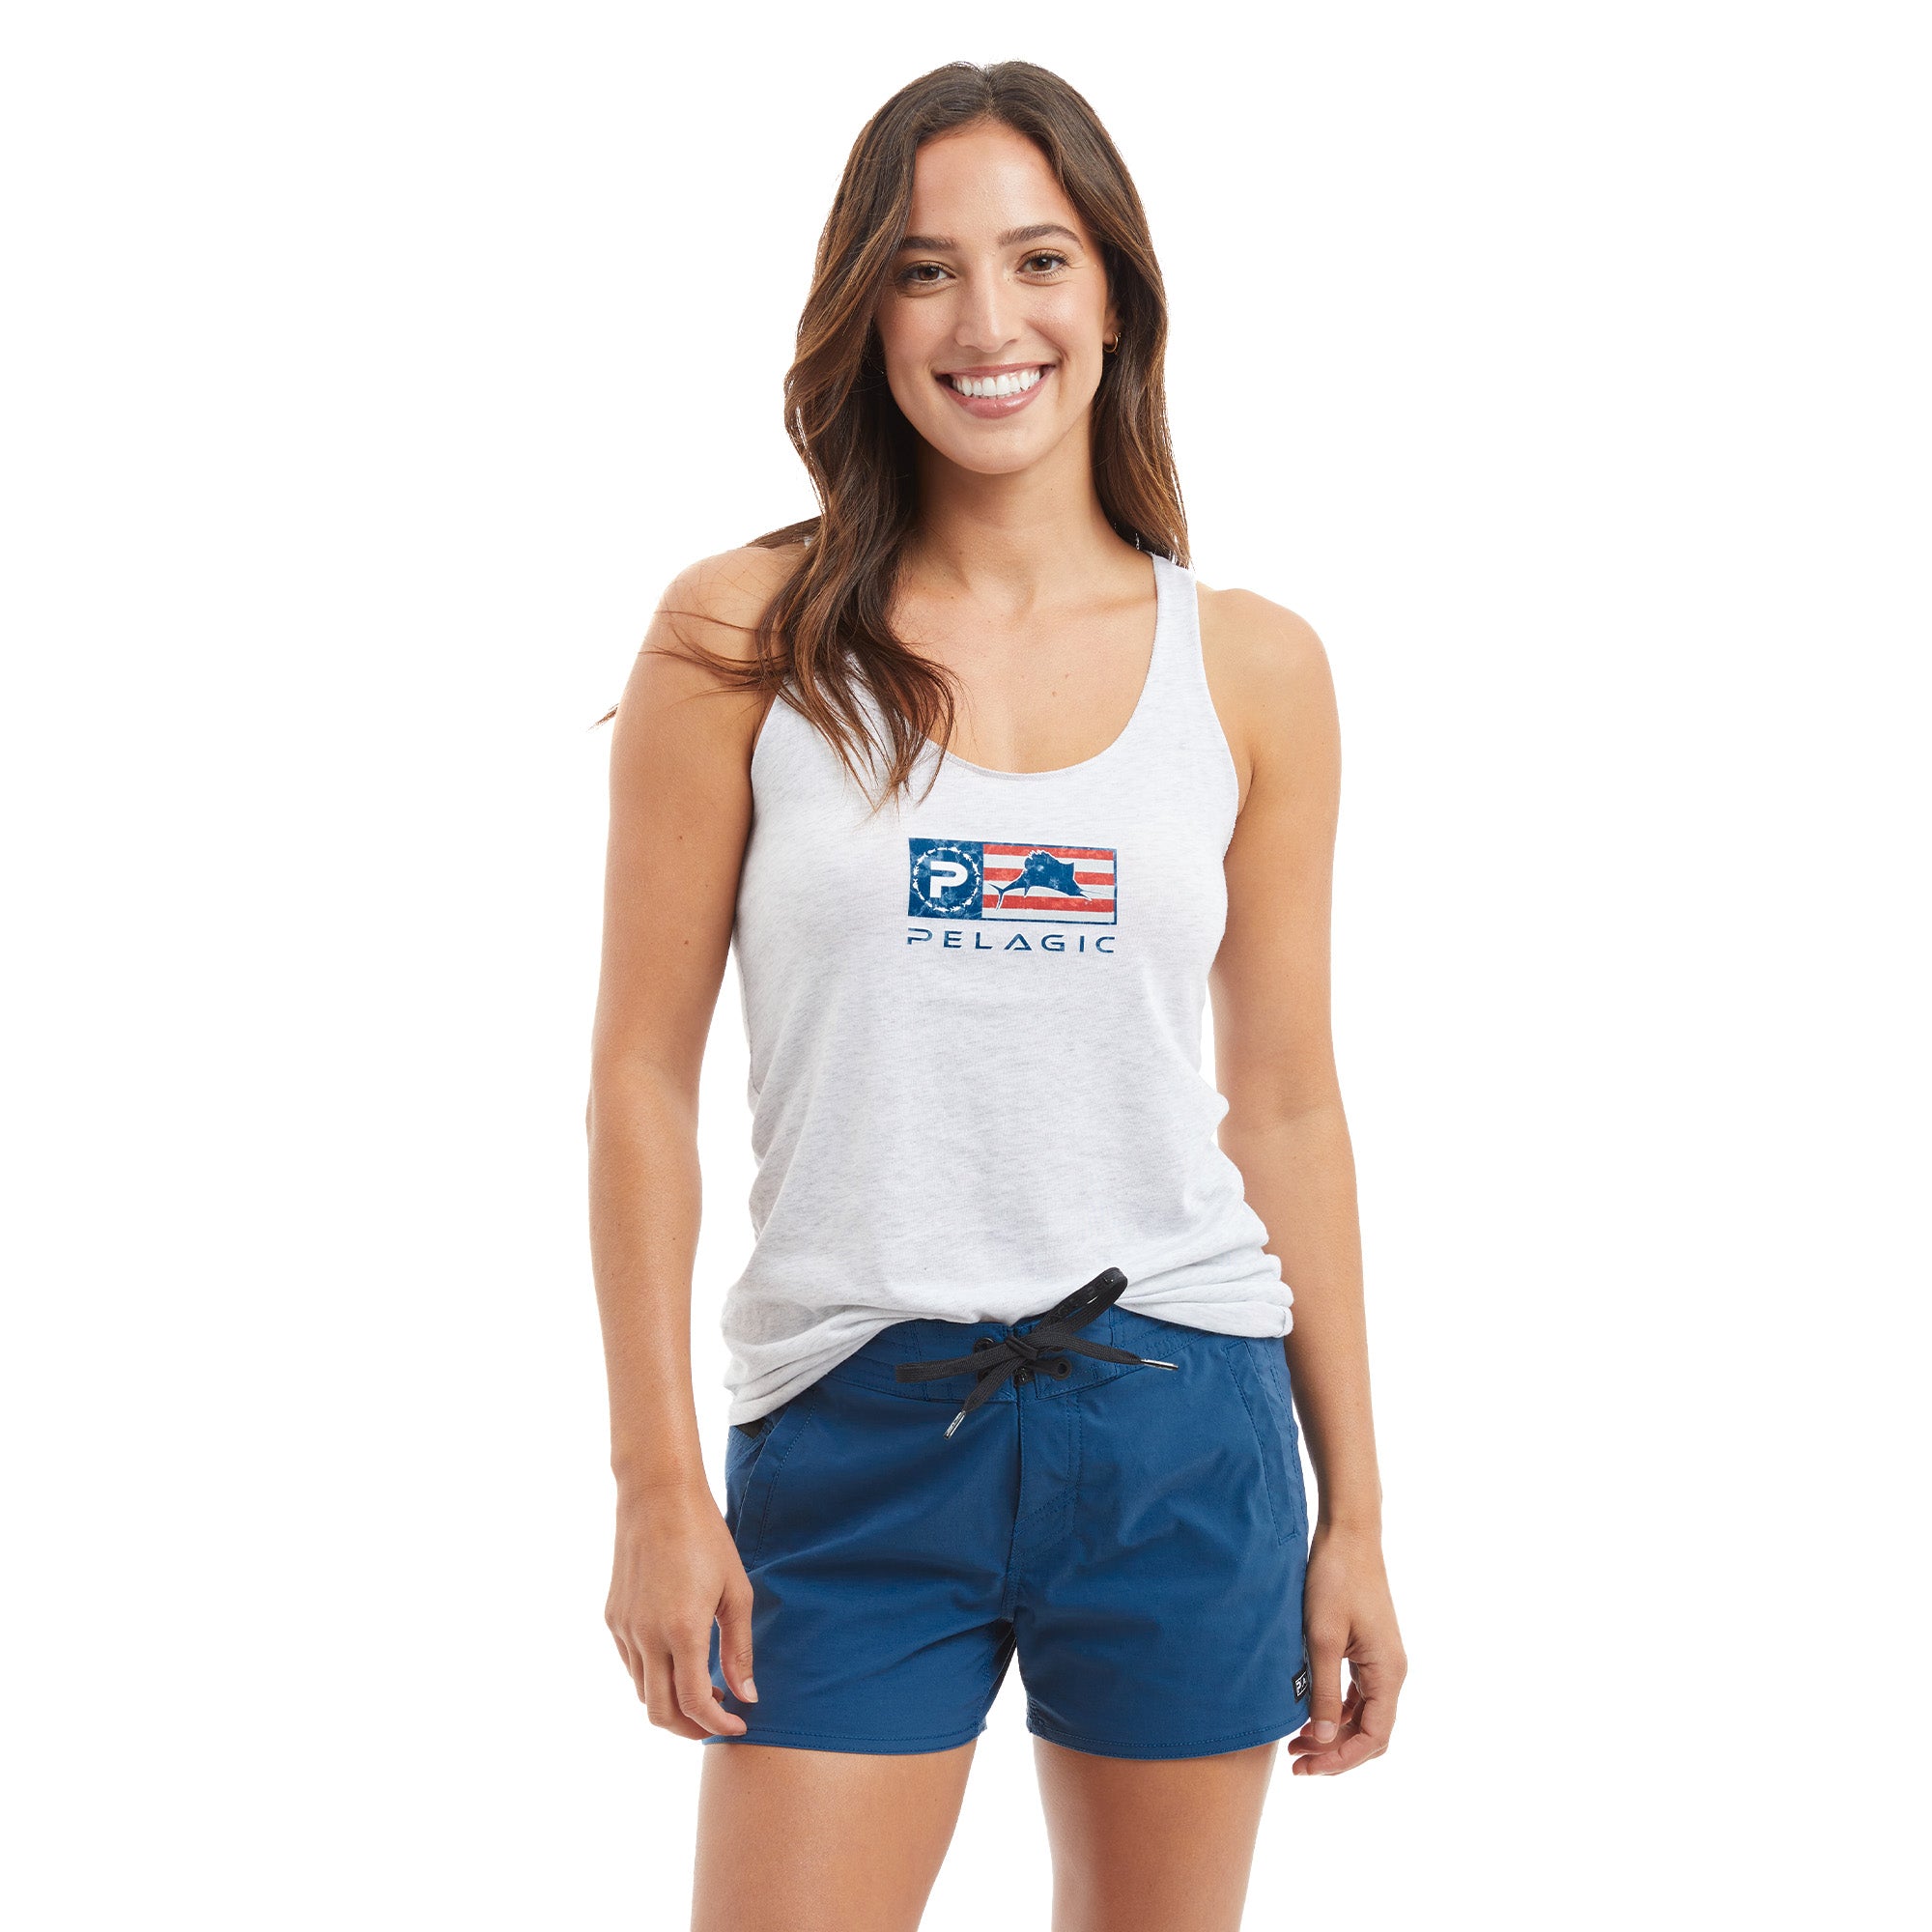 OLD NAVY Women's 2022 or 2023 US Flag T-SHIRT, Size up to XXL